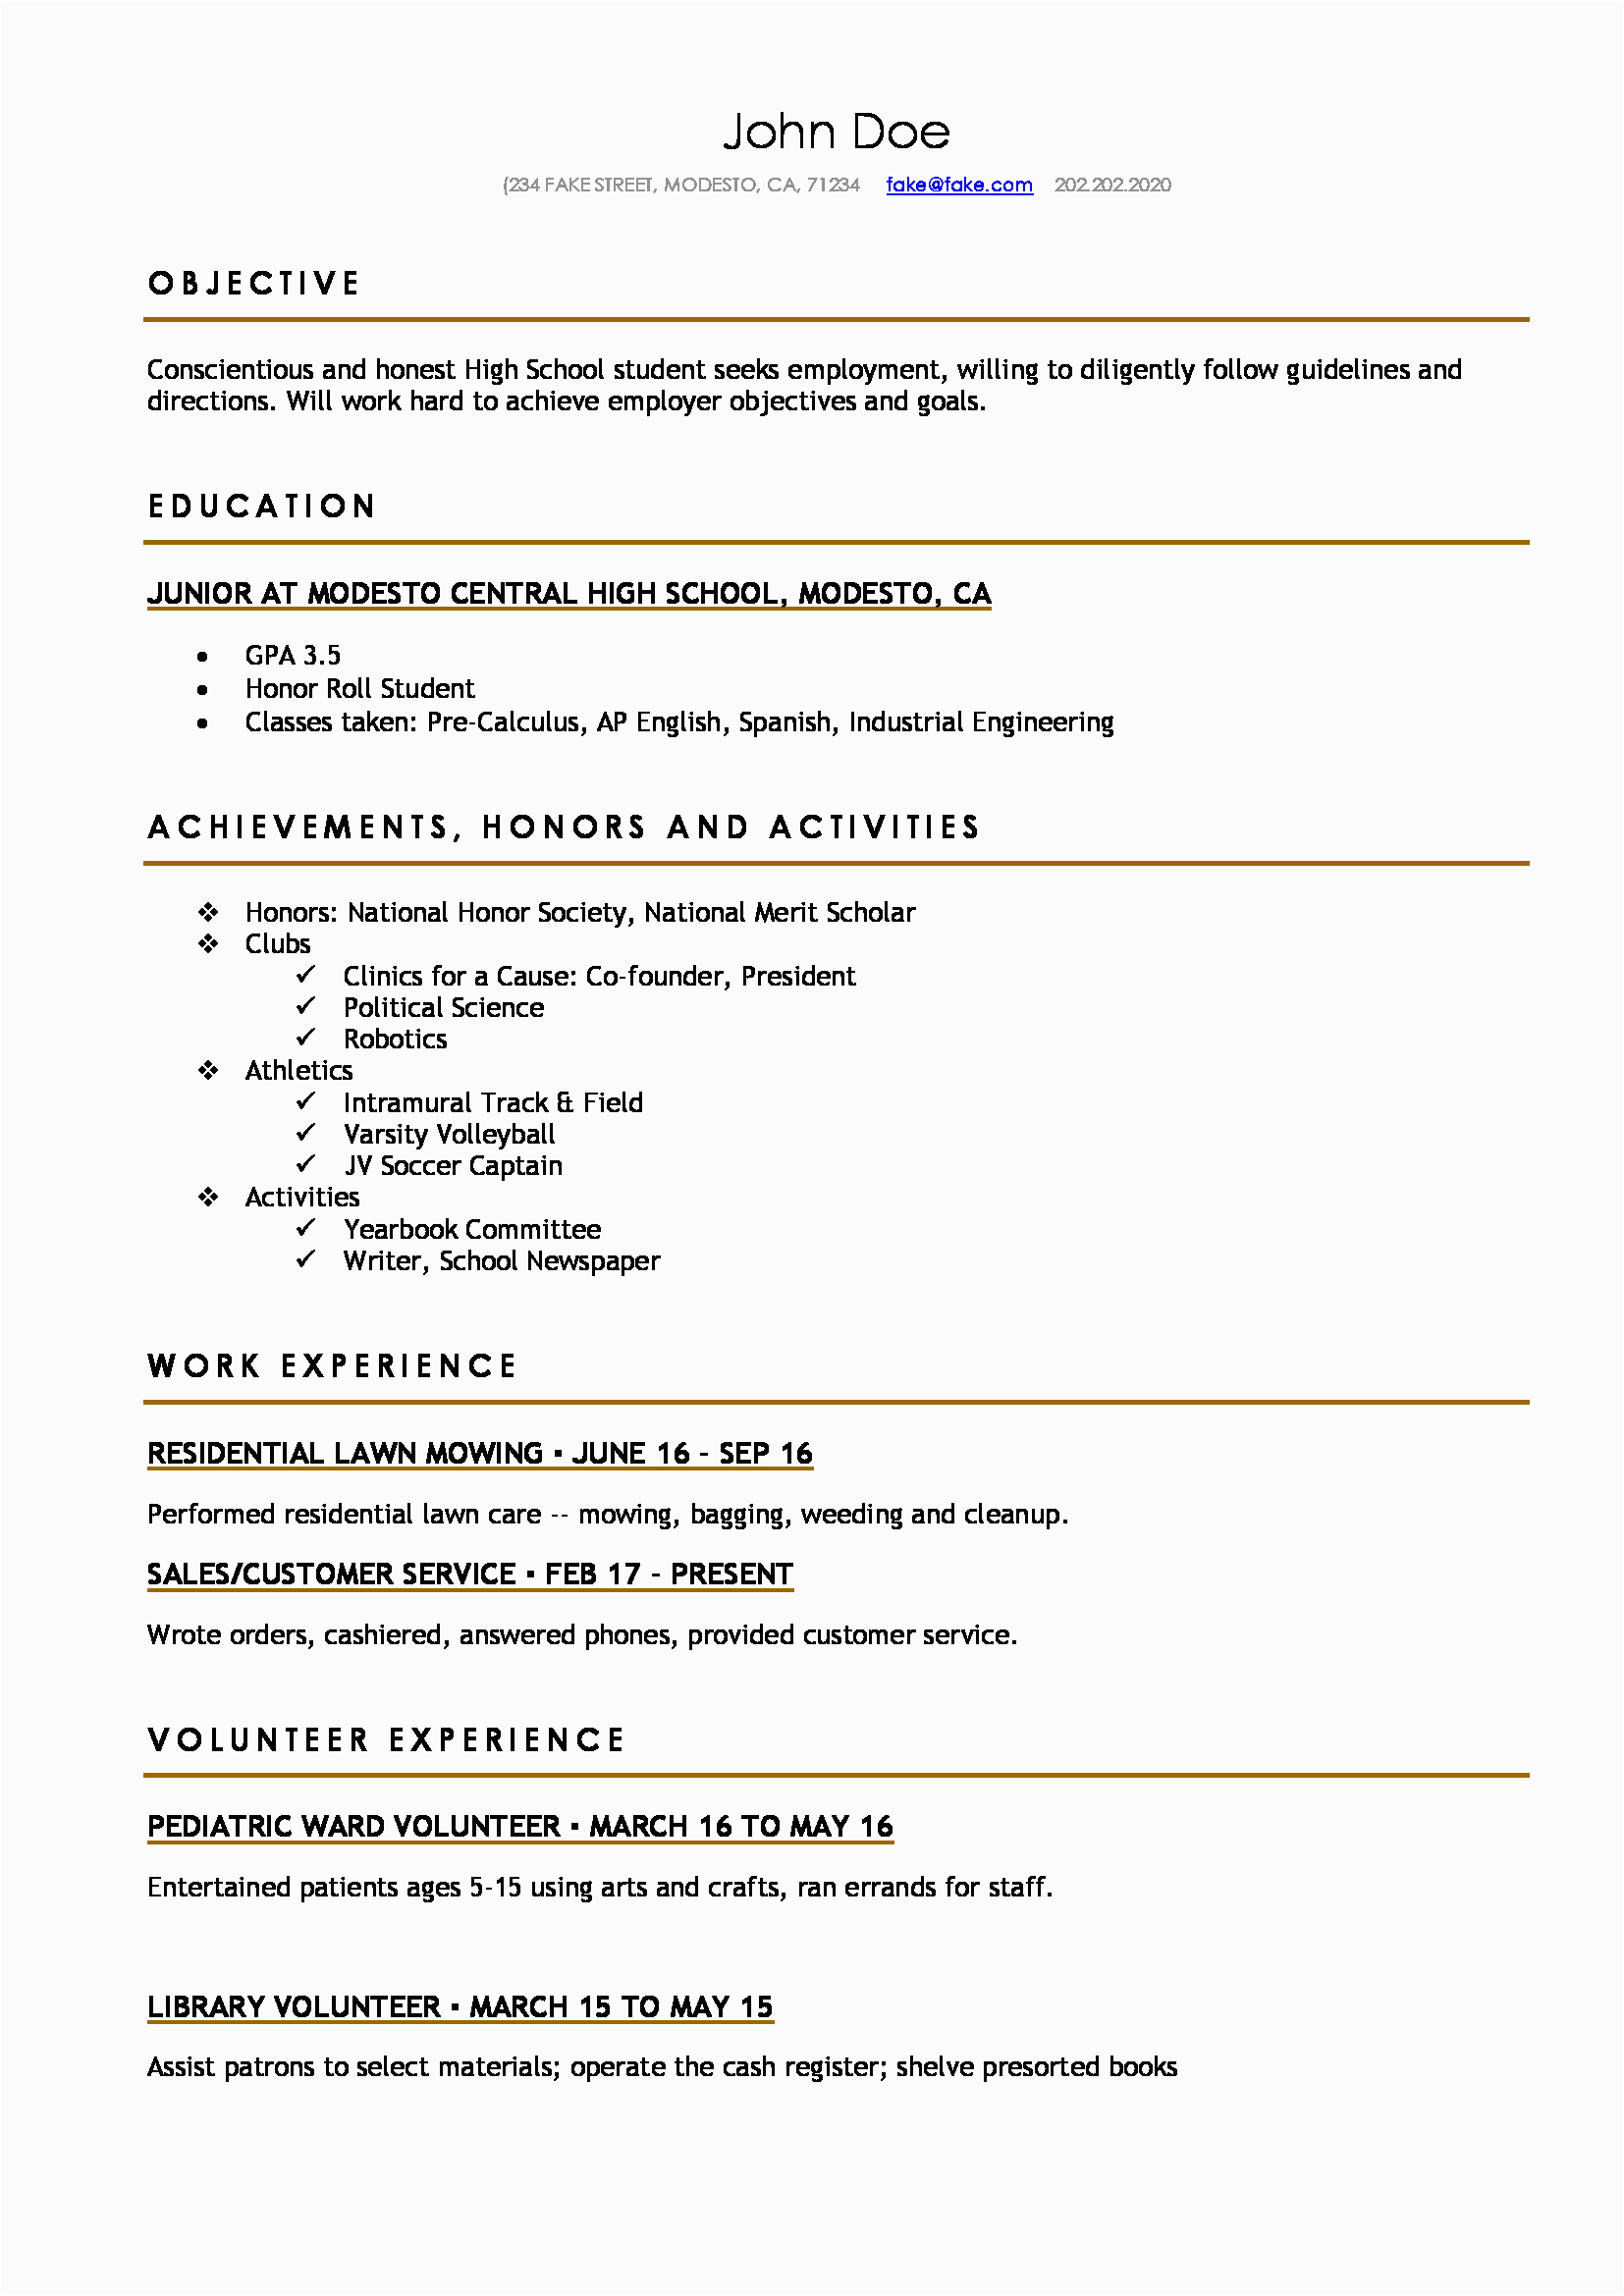 Basic Resume Template for High School Students High School Resume Resume Templates for High School